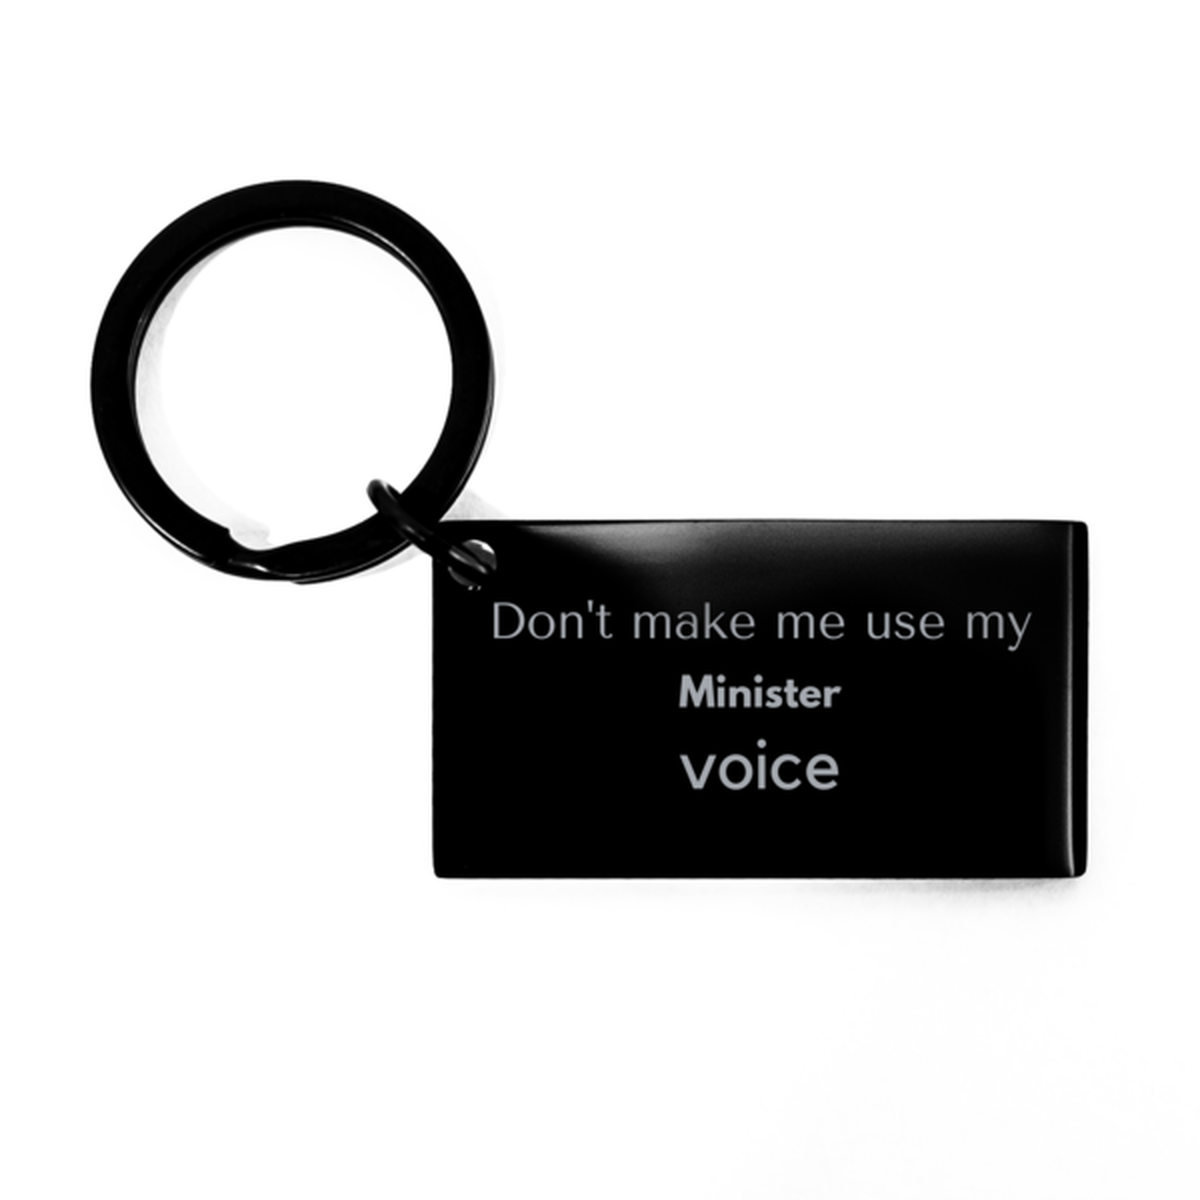 Don't make me use my Minister voice, Sarcasm Minister Gifts, Christmas Minister Keychain Birthday Unique Gifts For Minister Coworkers, Men, Women, Colleague, Friends